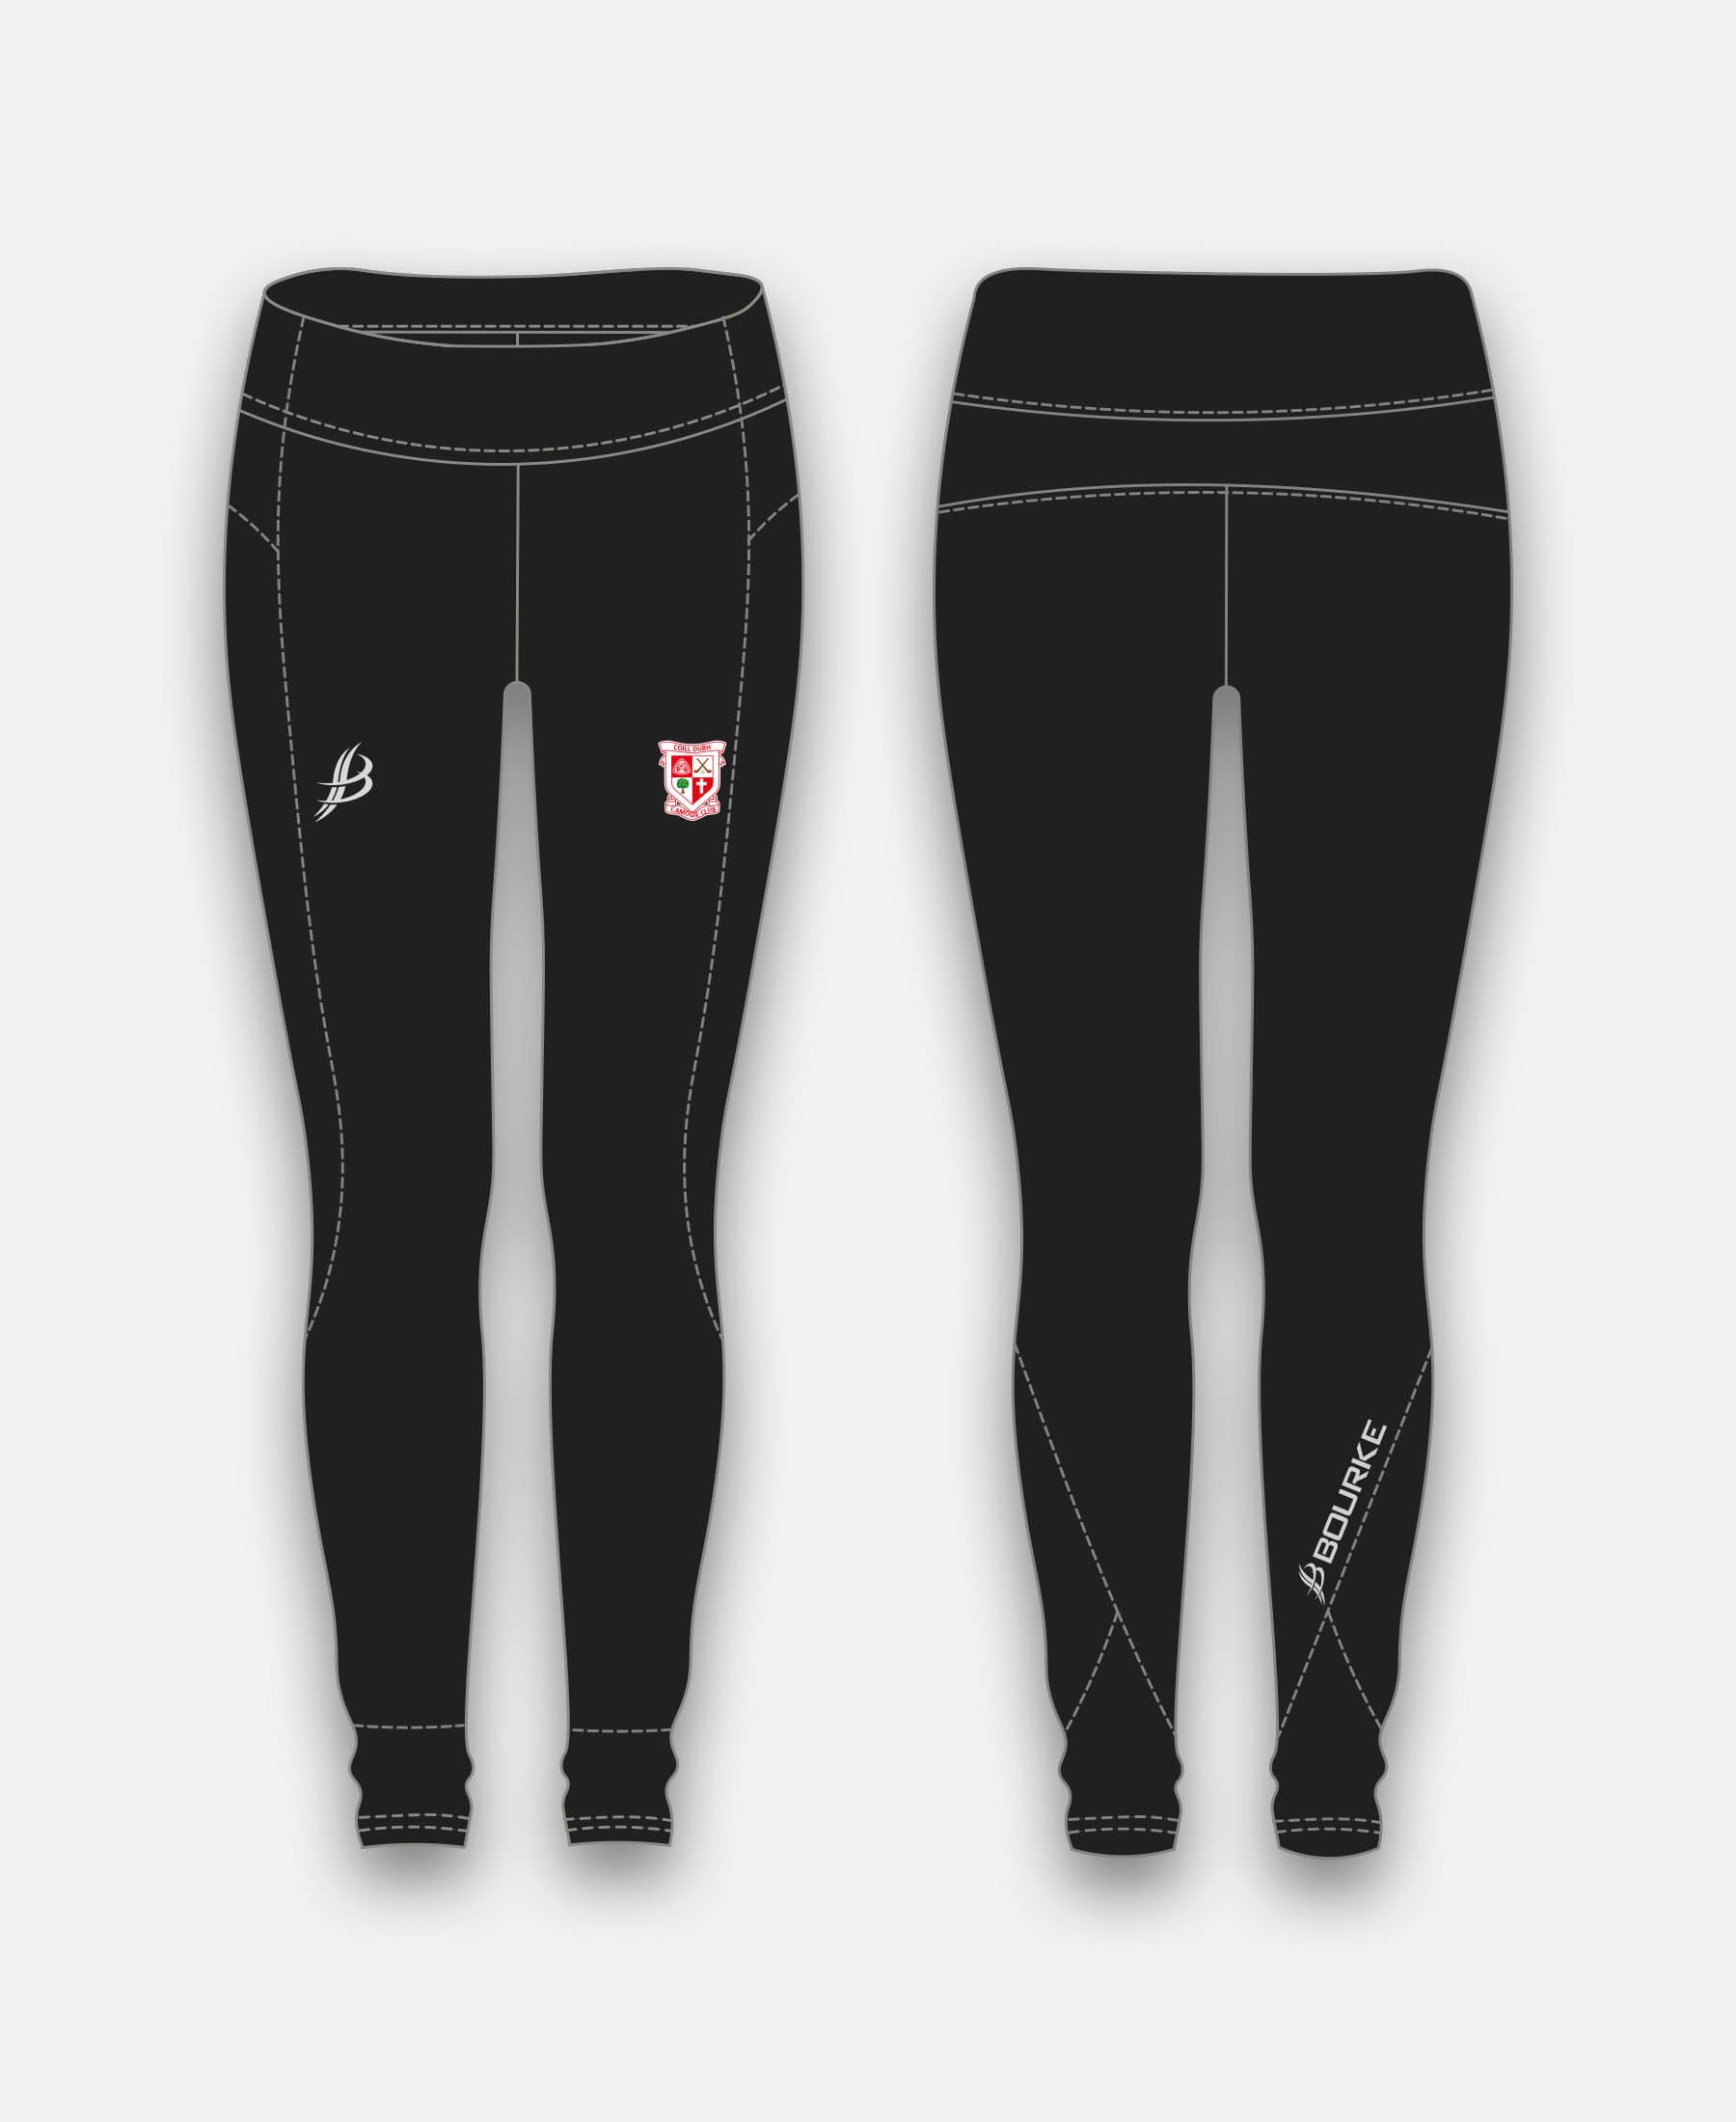 Coill Dubh Camogie BEO Leggings (Black)